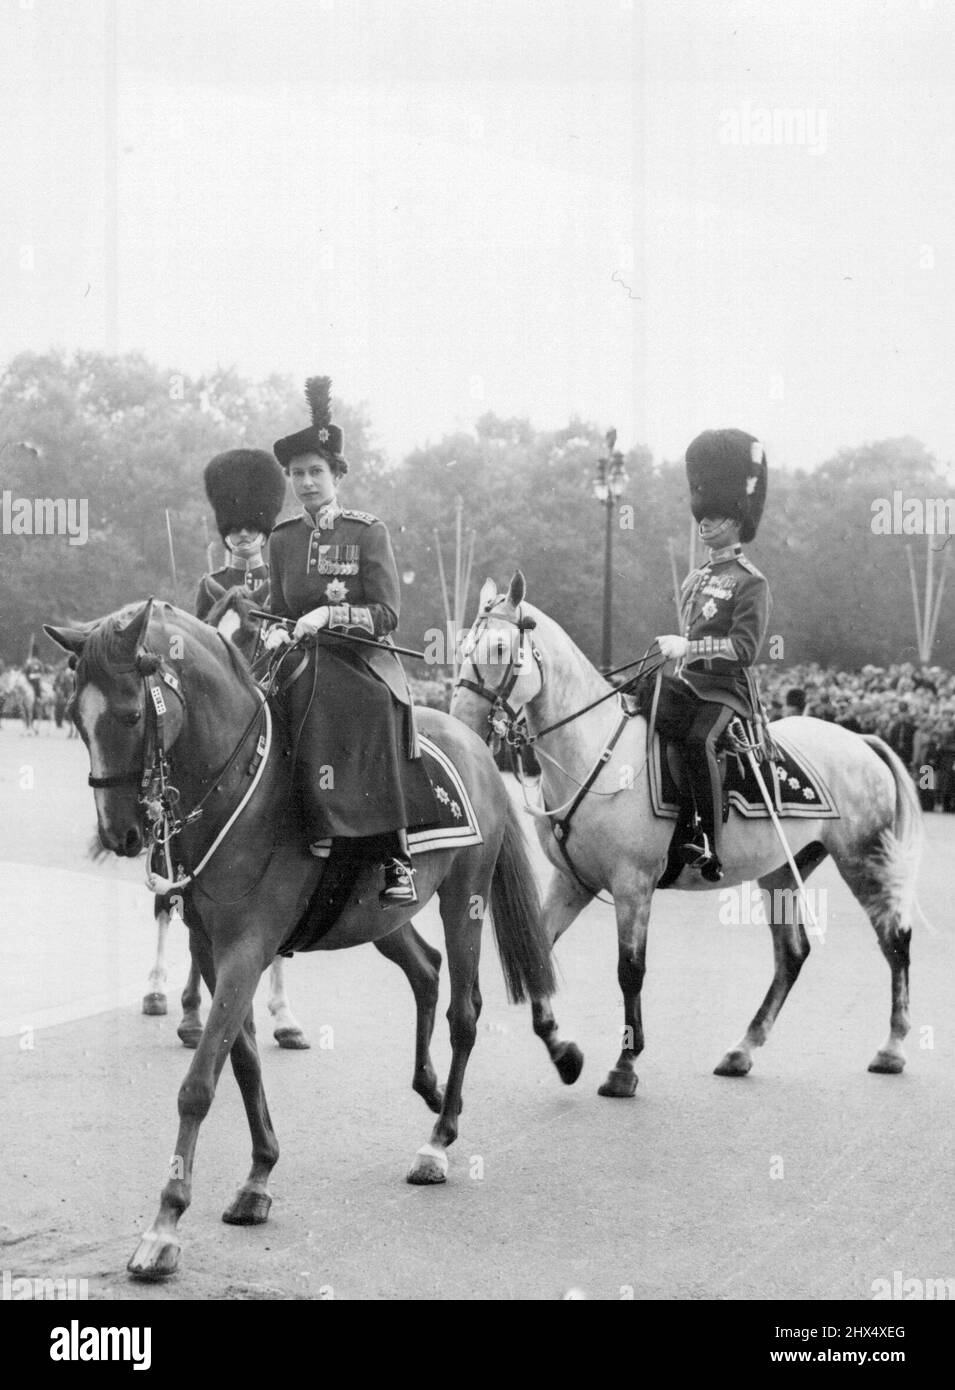 Queen And Duke After Trooping Ceremony - Queen Elizabeth, wearing the uniform as Colonel-in-chief, Goldstream guards and riding side-saddle, is accompanied by the Duke of Edinburgh (right), as she arrives back at Buckingham palace following the Trooping the Colour ceremony on horse guards parade. The Duke who is 33 today, wears the uniform of Colonel of the Welsh guards. June 10, 1954. (Photo by United Press Photo). Stock Photo